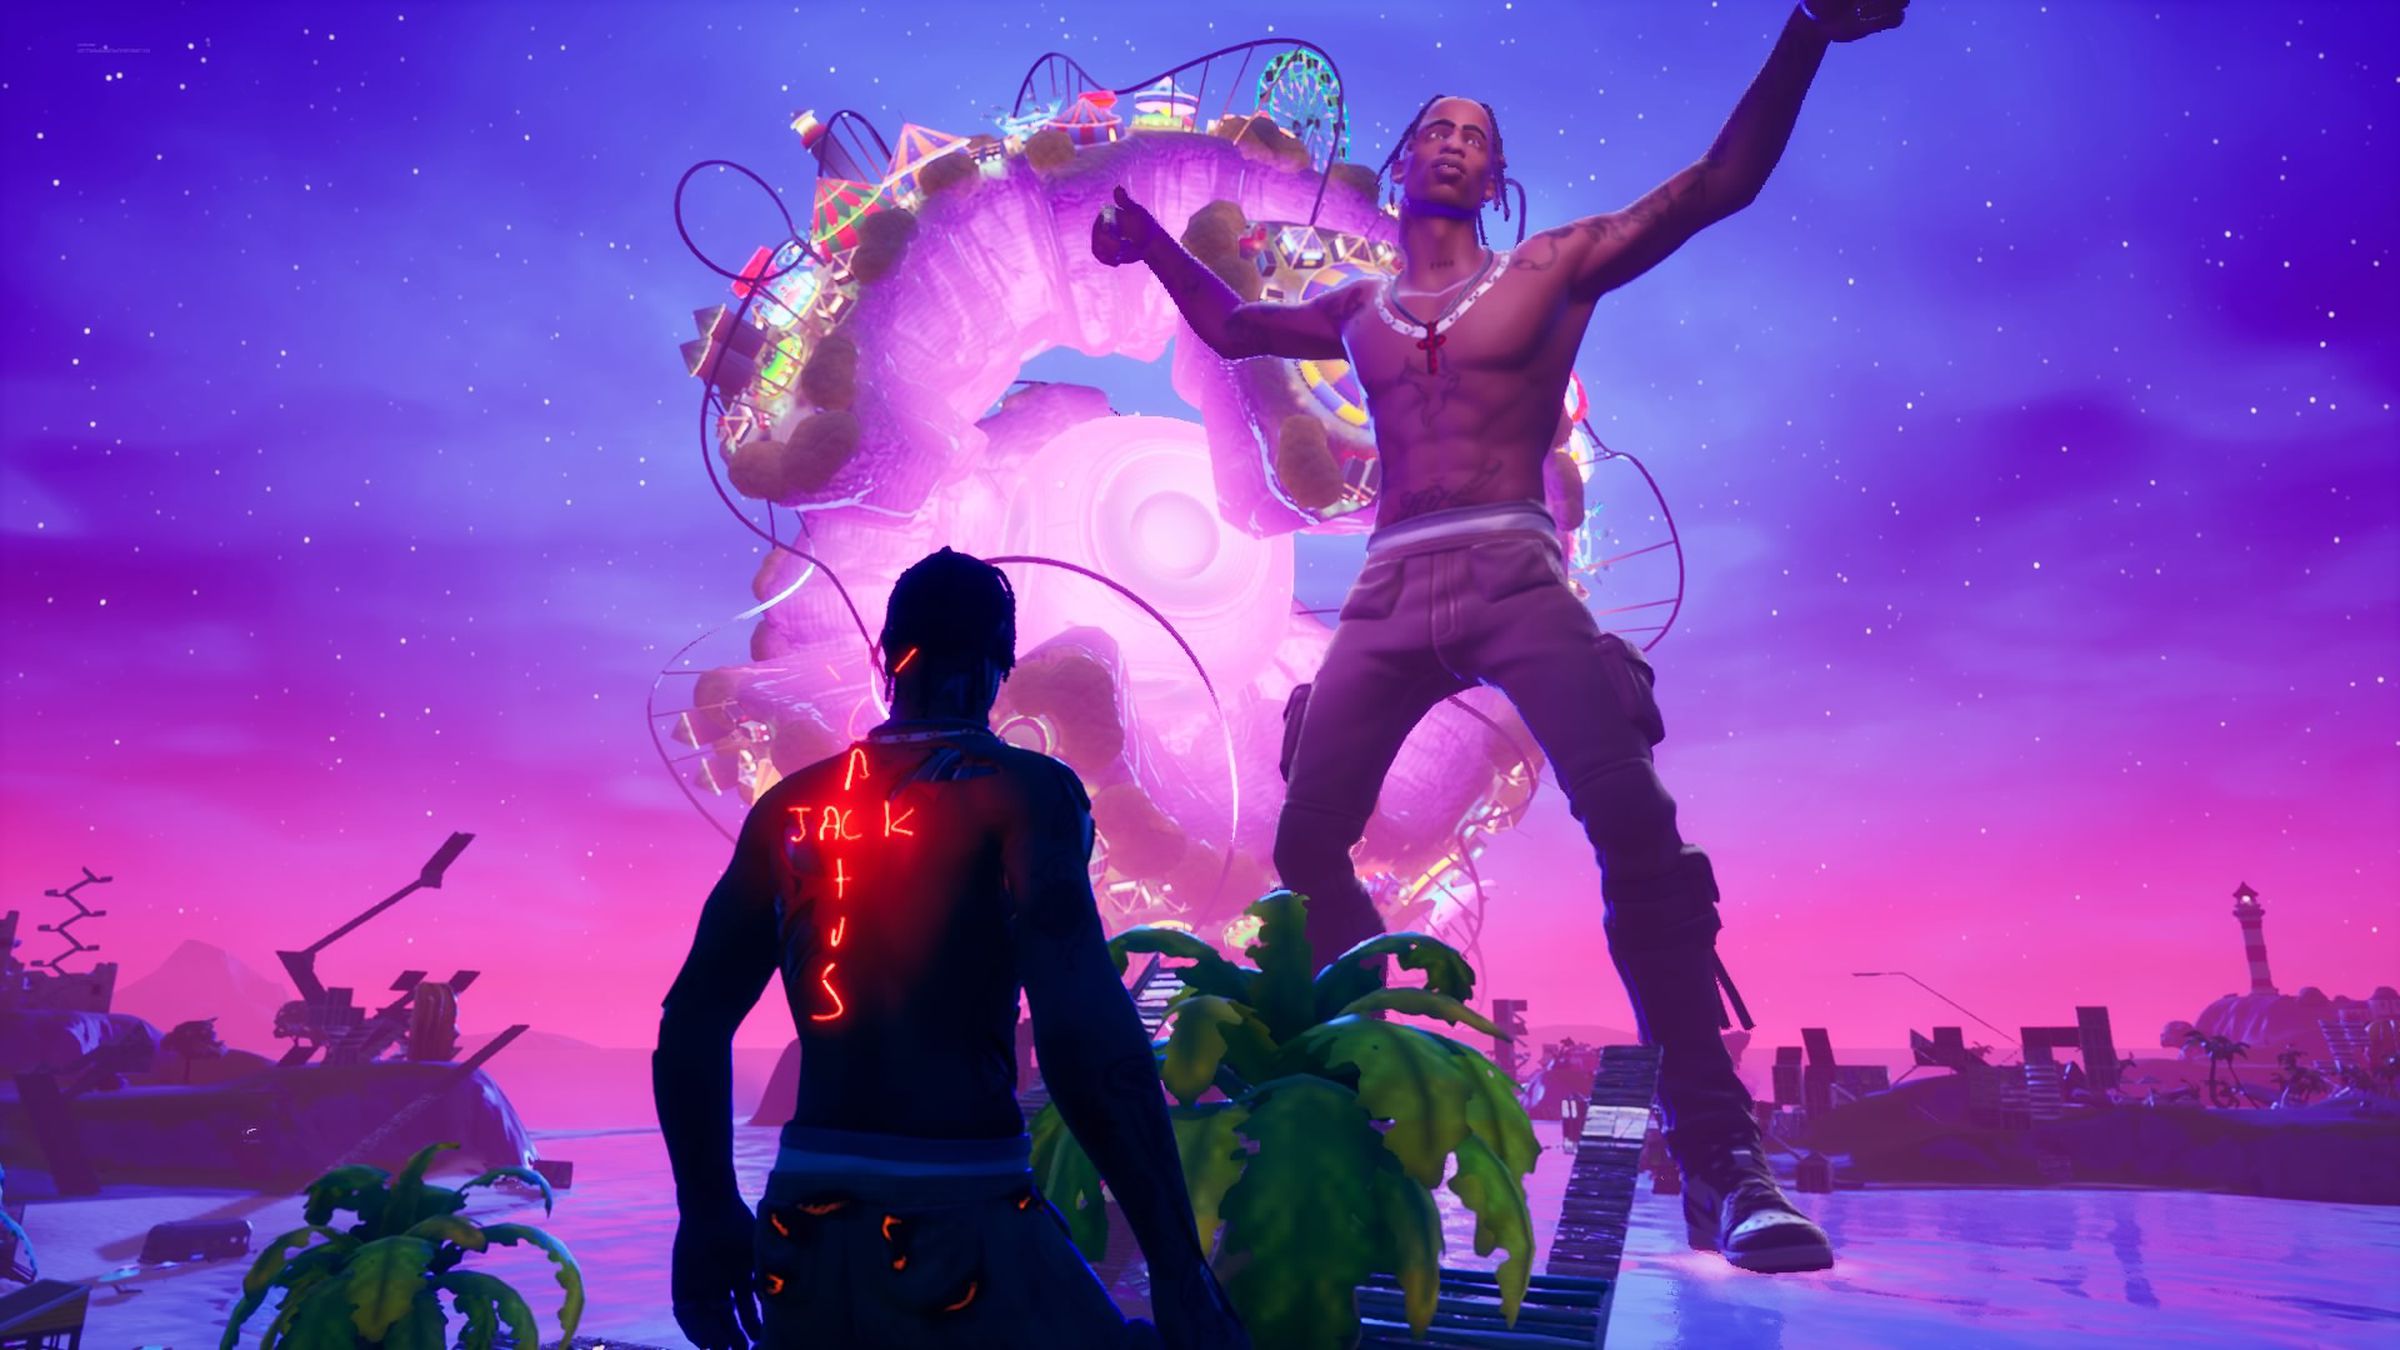 Fortnite is renowned for its big in-game events, and players on Apple devices might miss out on future ones.